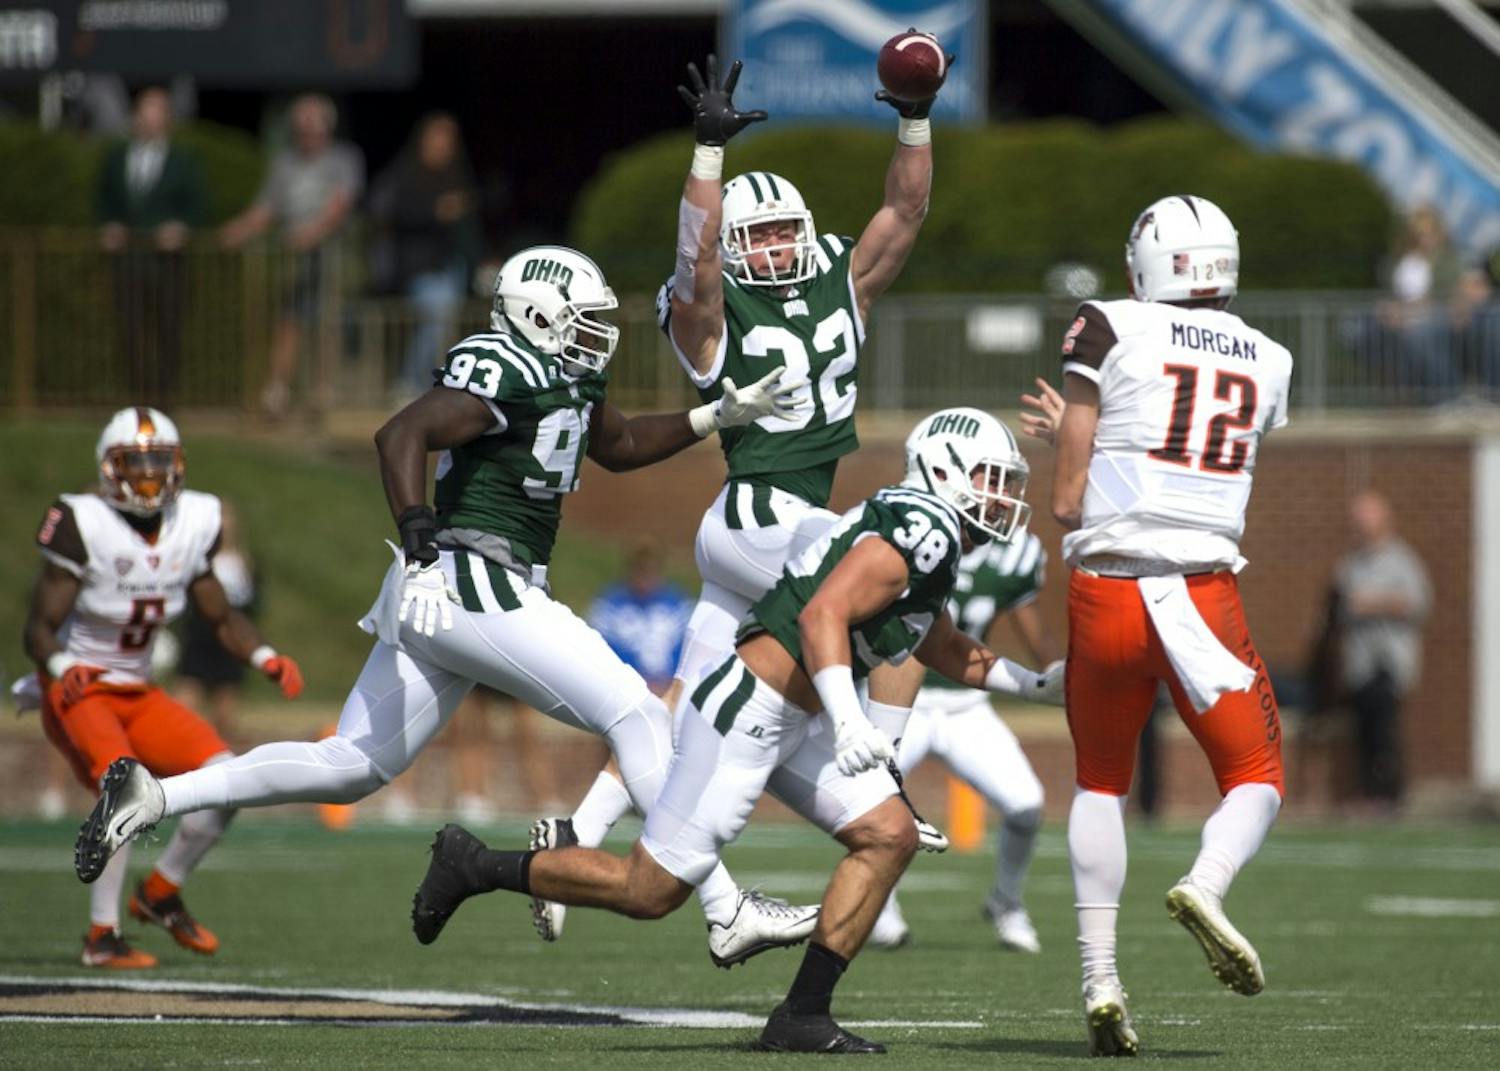 Ohio redshirt junior linebacker Quentin Poling (#32) jumps to block a pass from Bowling Green redshirt freshman quarterback James Morgan during the first quarter of Ohio's 30-24 Homecoming Weekend win, their first win over Bowling Green since 2011. 